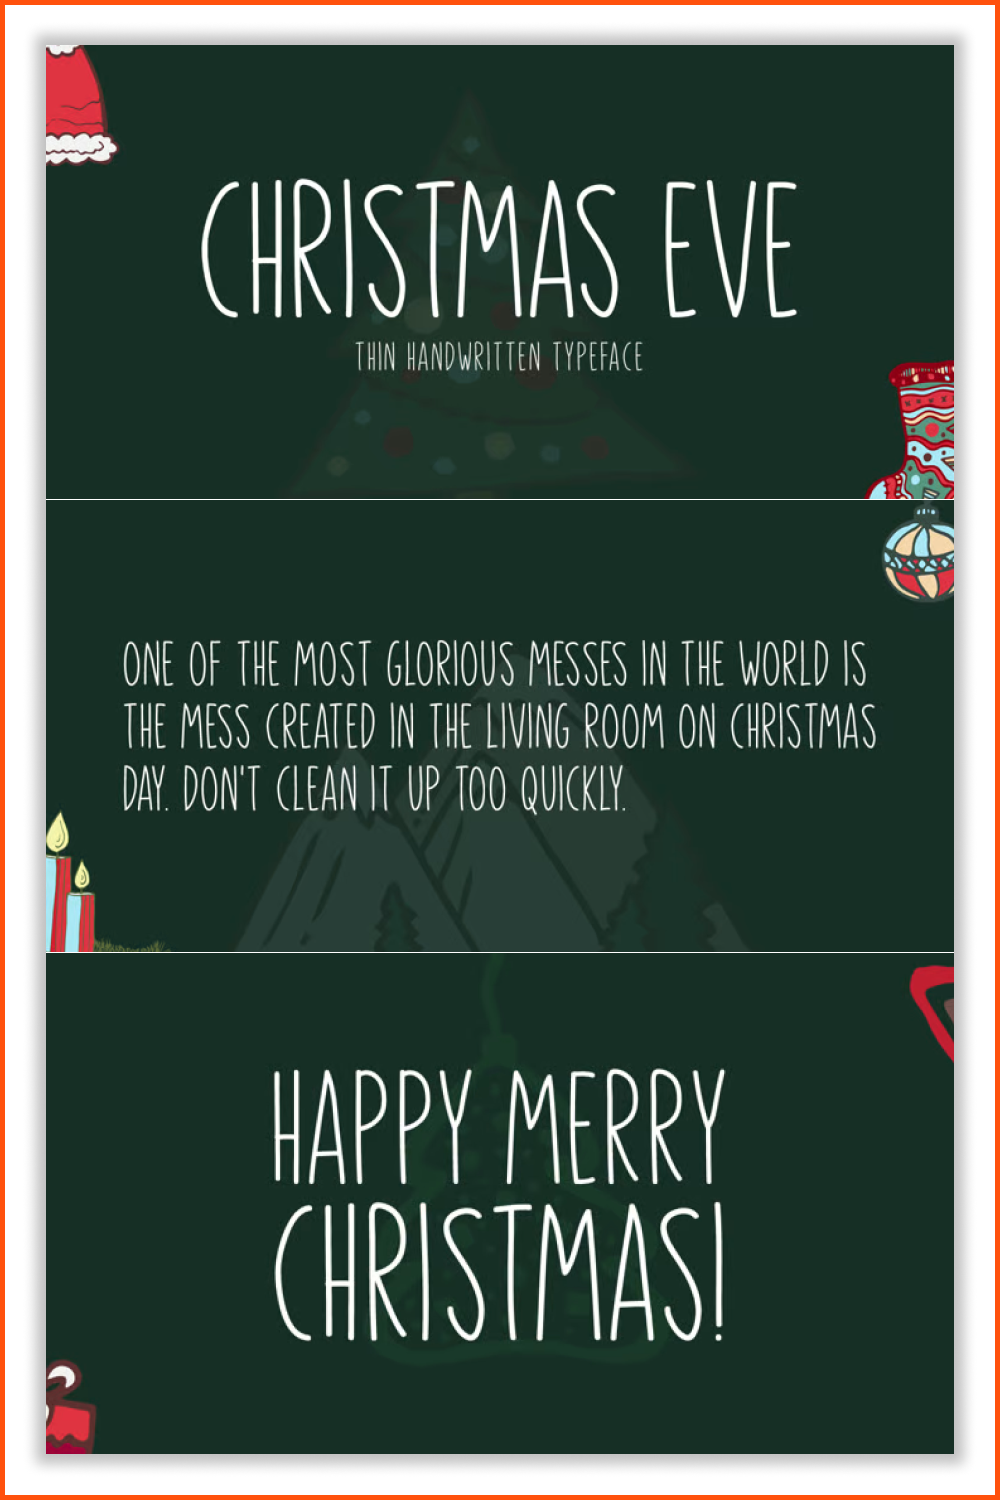 Text written in typeface Christmas Eve on a green background with christmas elements.